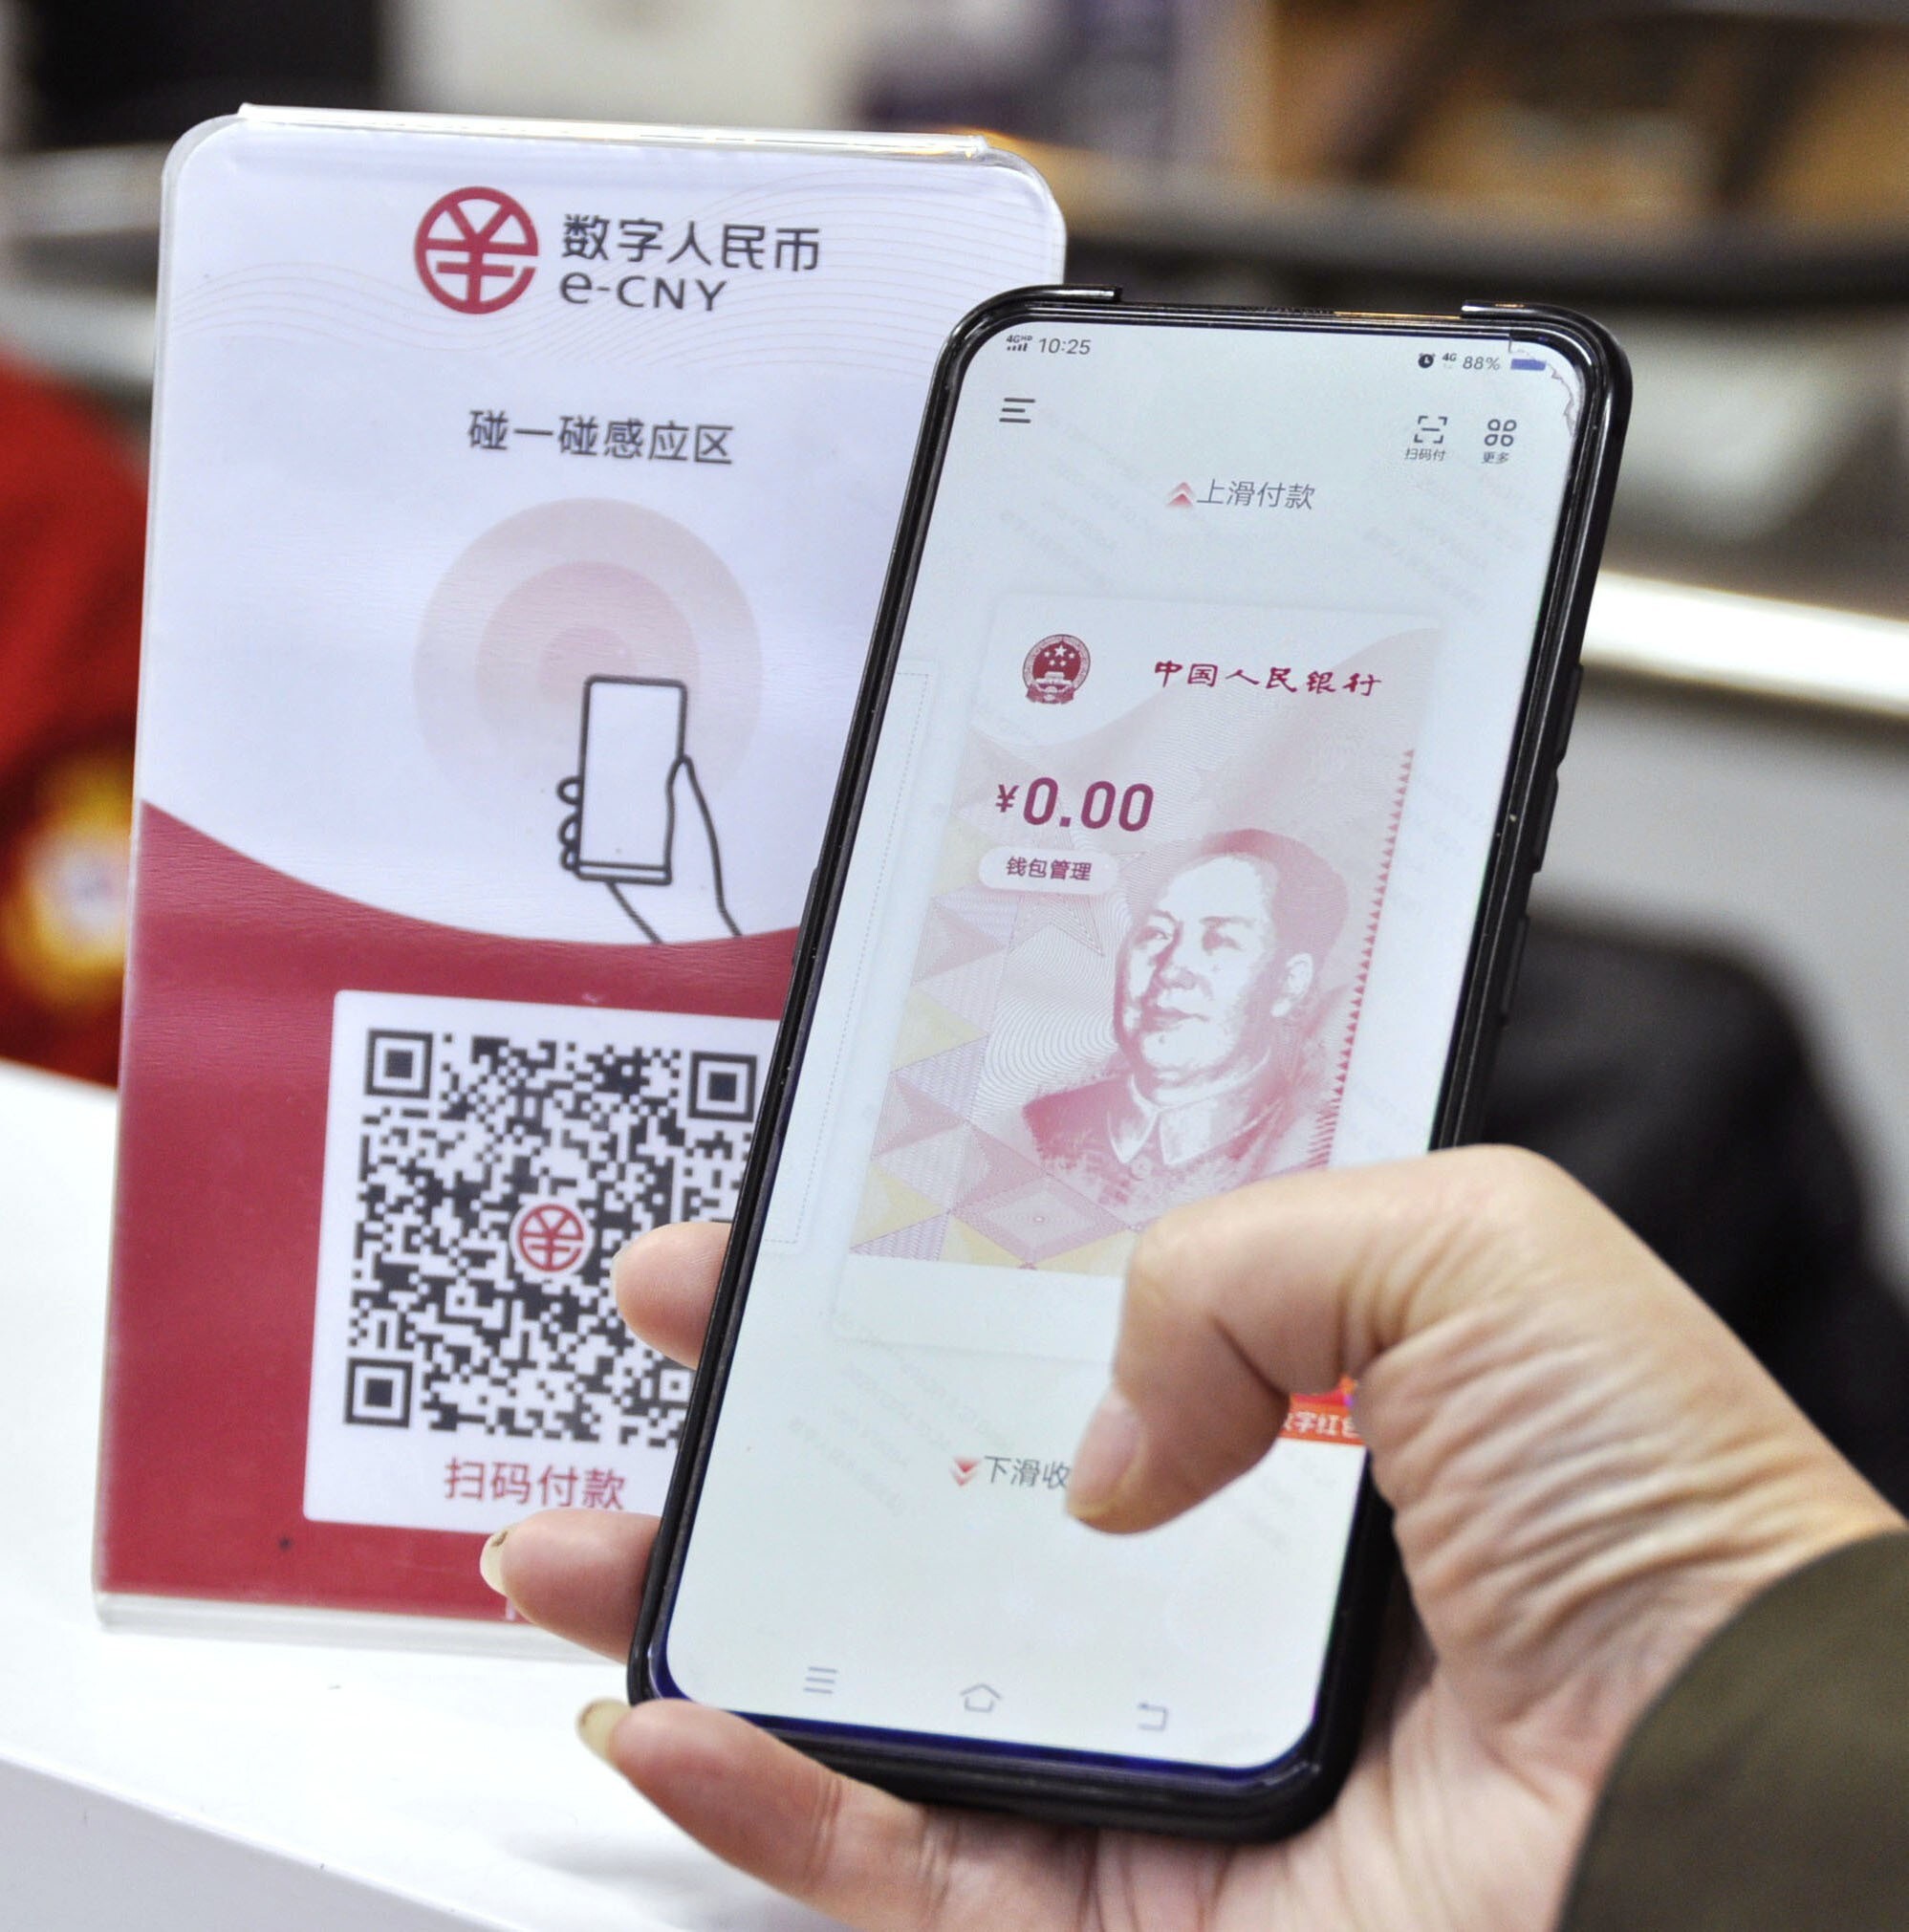 China digital currency: could Beijing's advanced e-yuan replace smaller  Asian currencies? | South China Morning Post